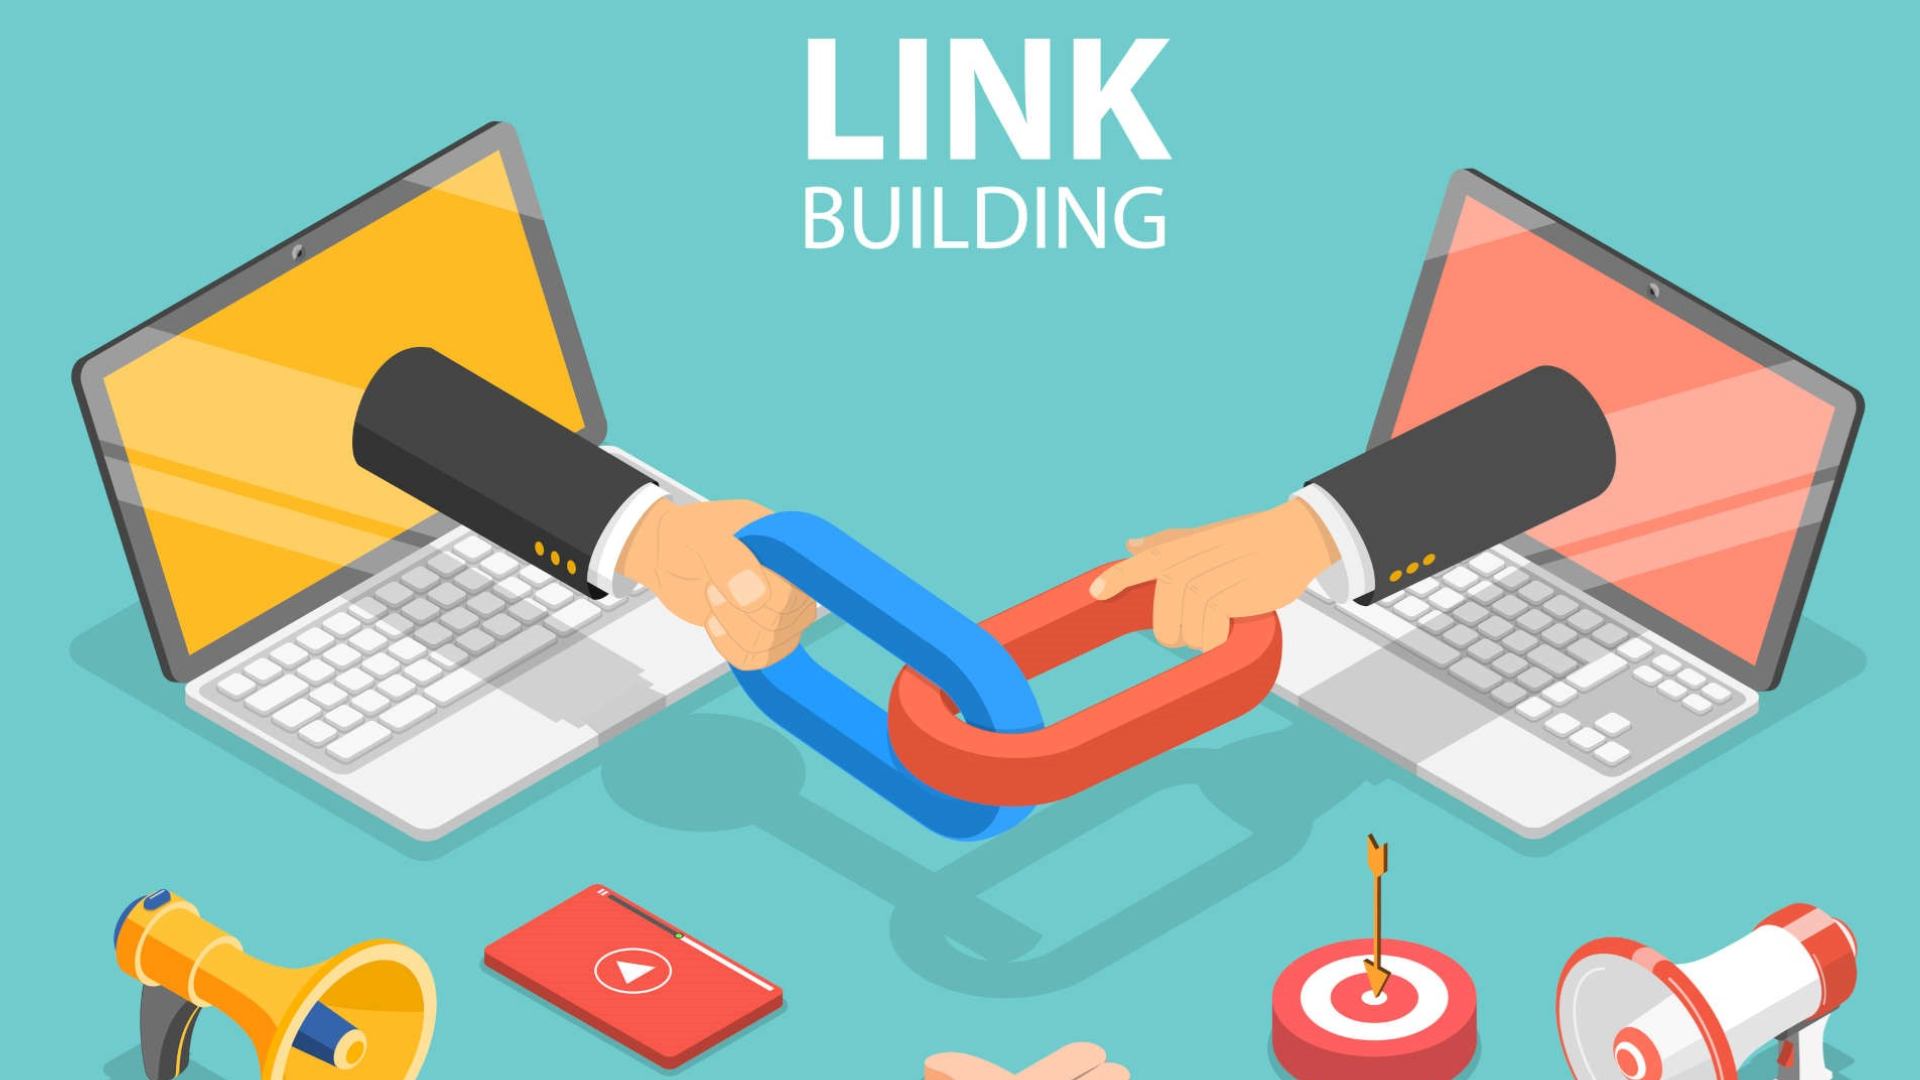 Profile Link Building Sites And Where To Find Them